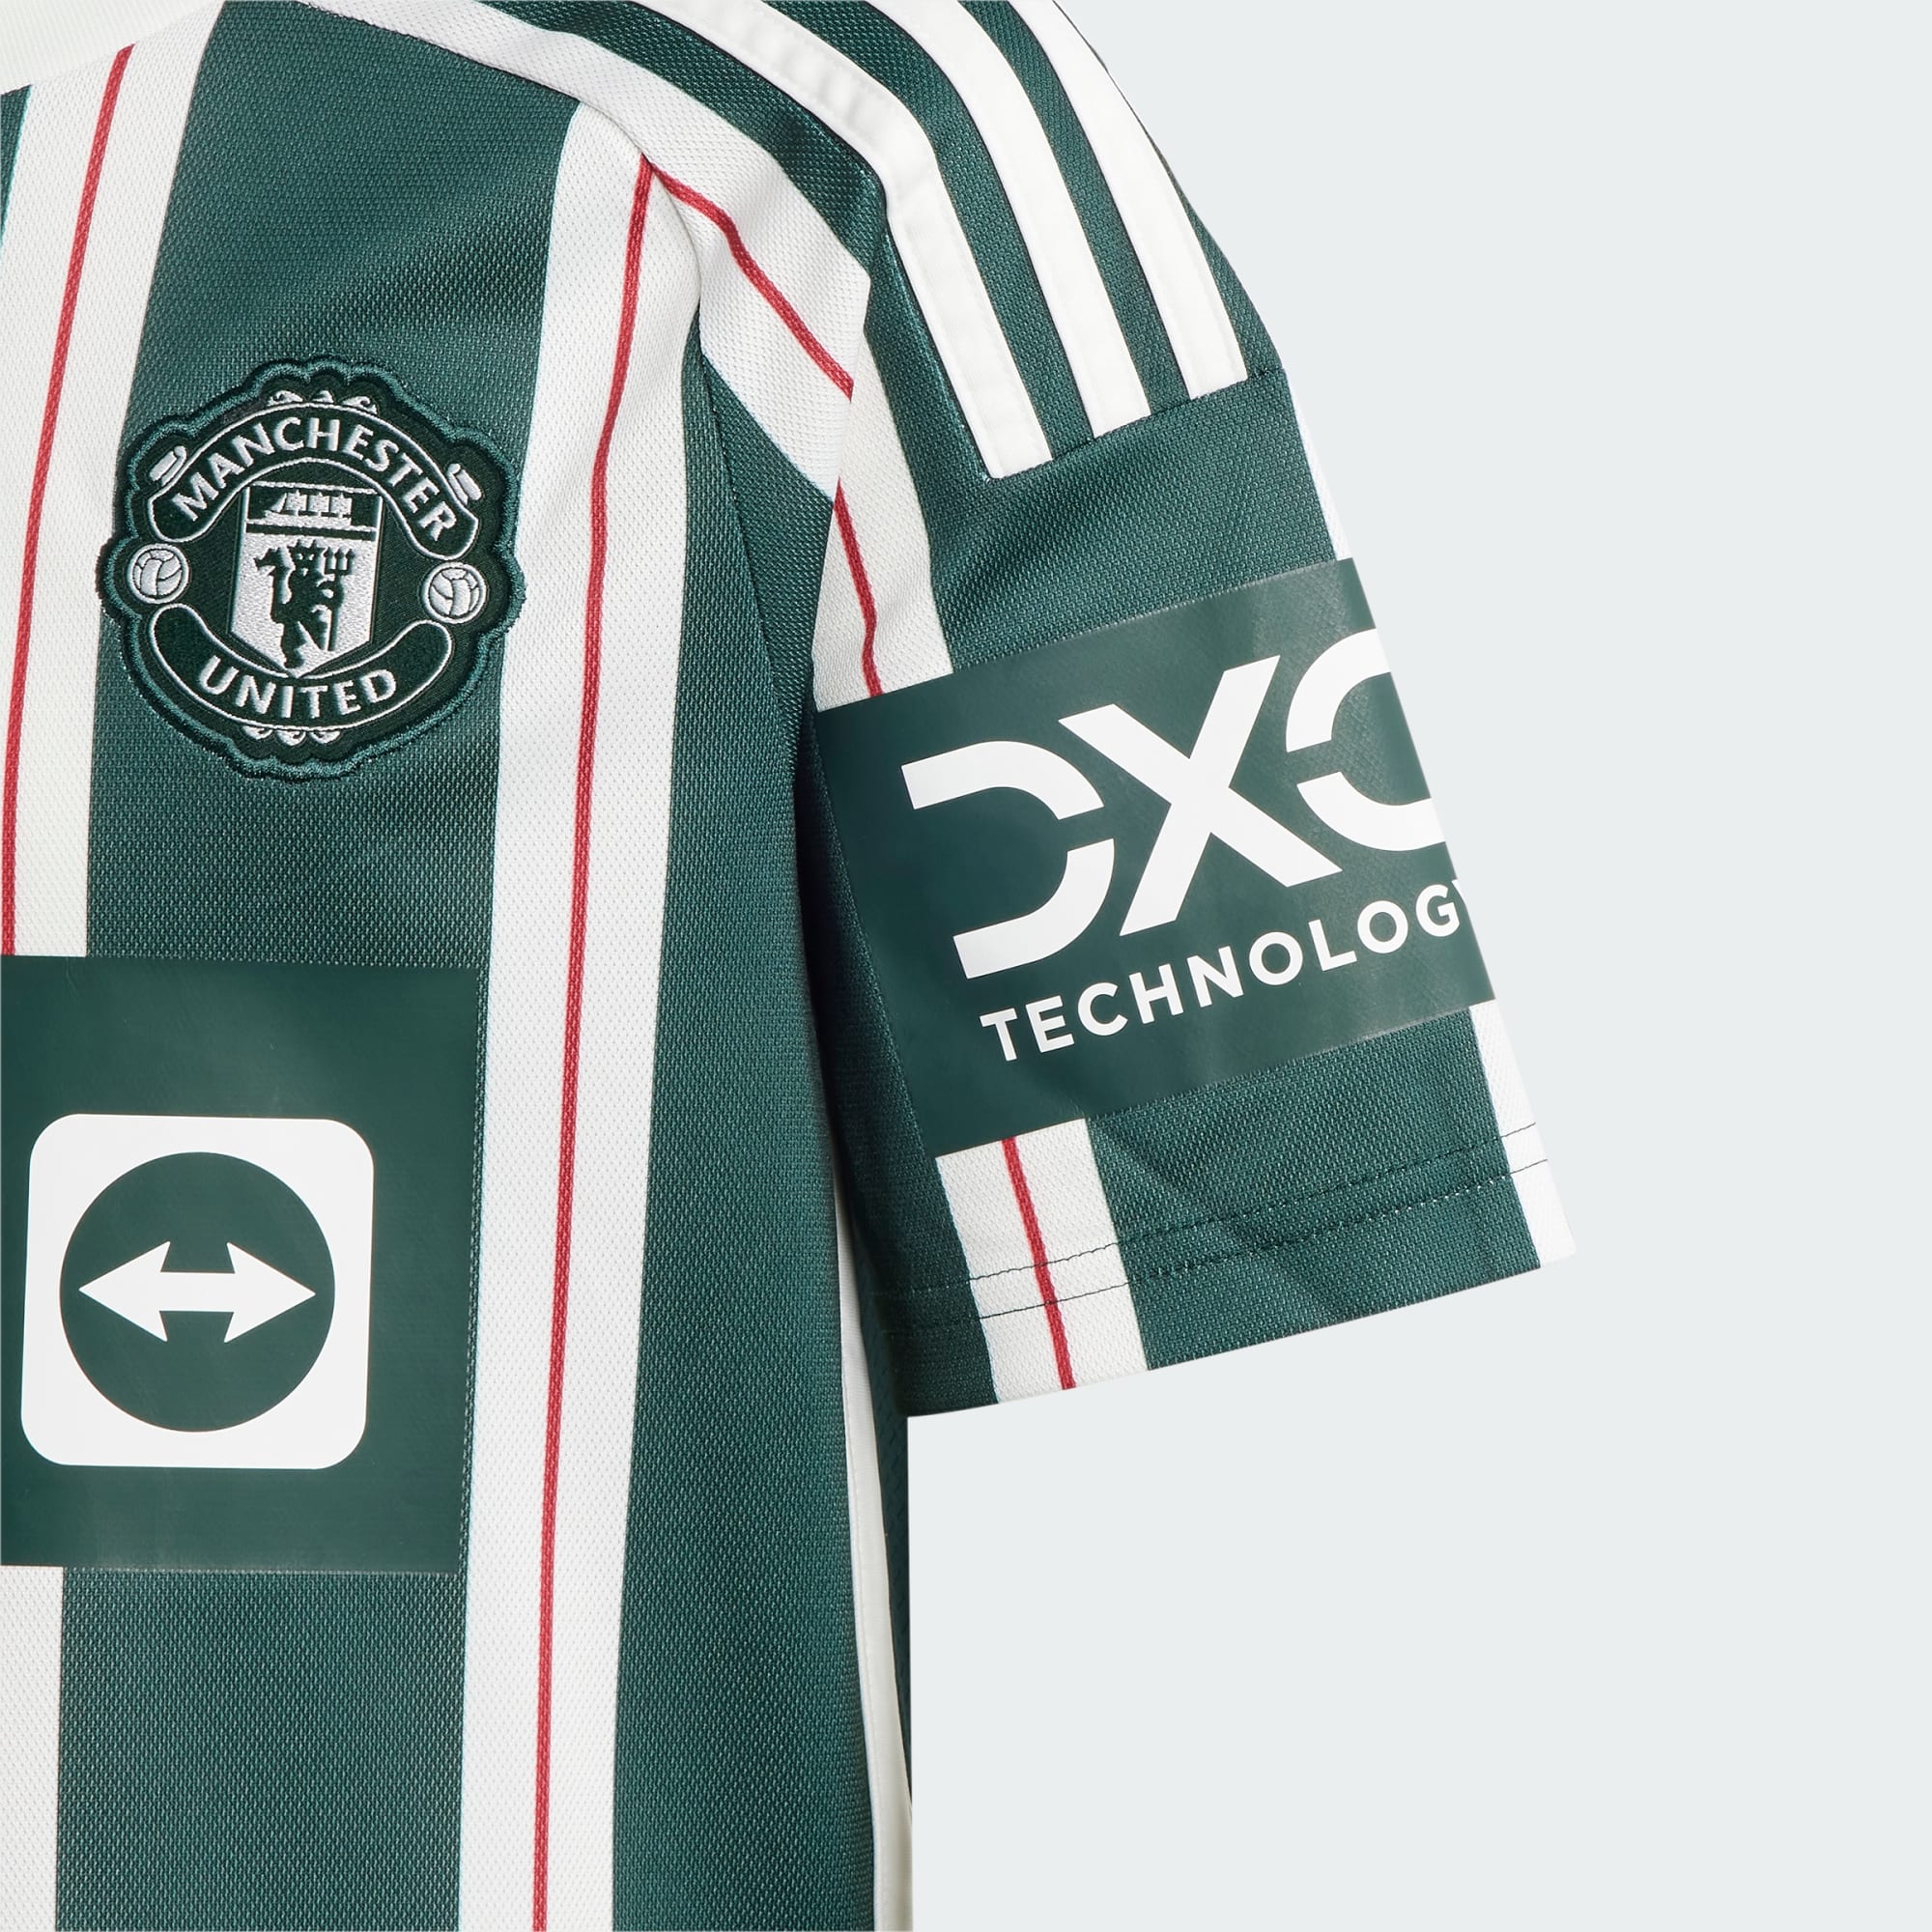 Adidas Manchester United Away Authentic Jersey 23 Green Night / S